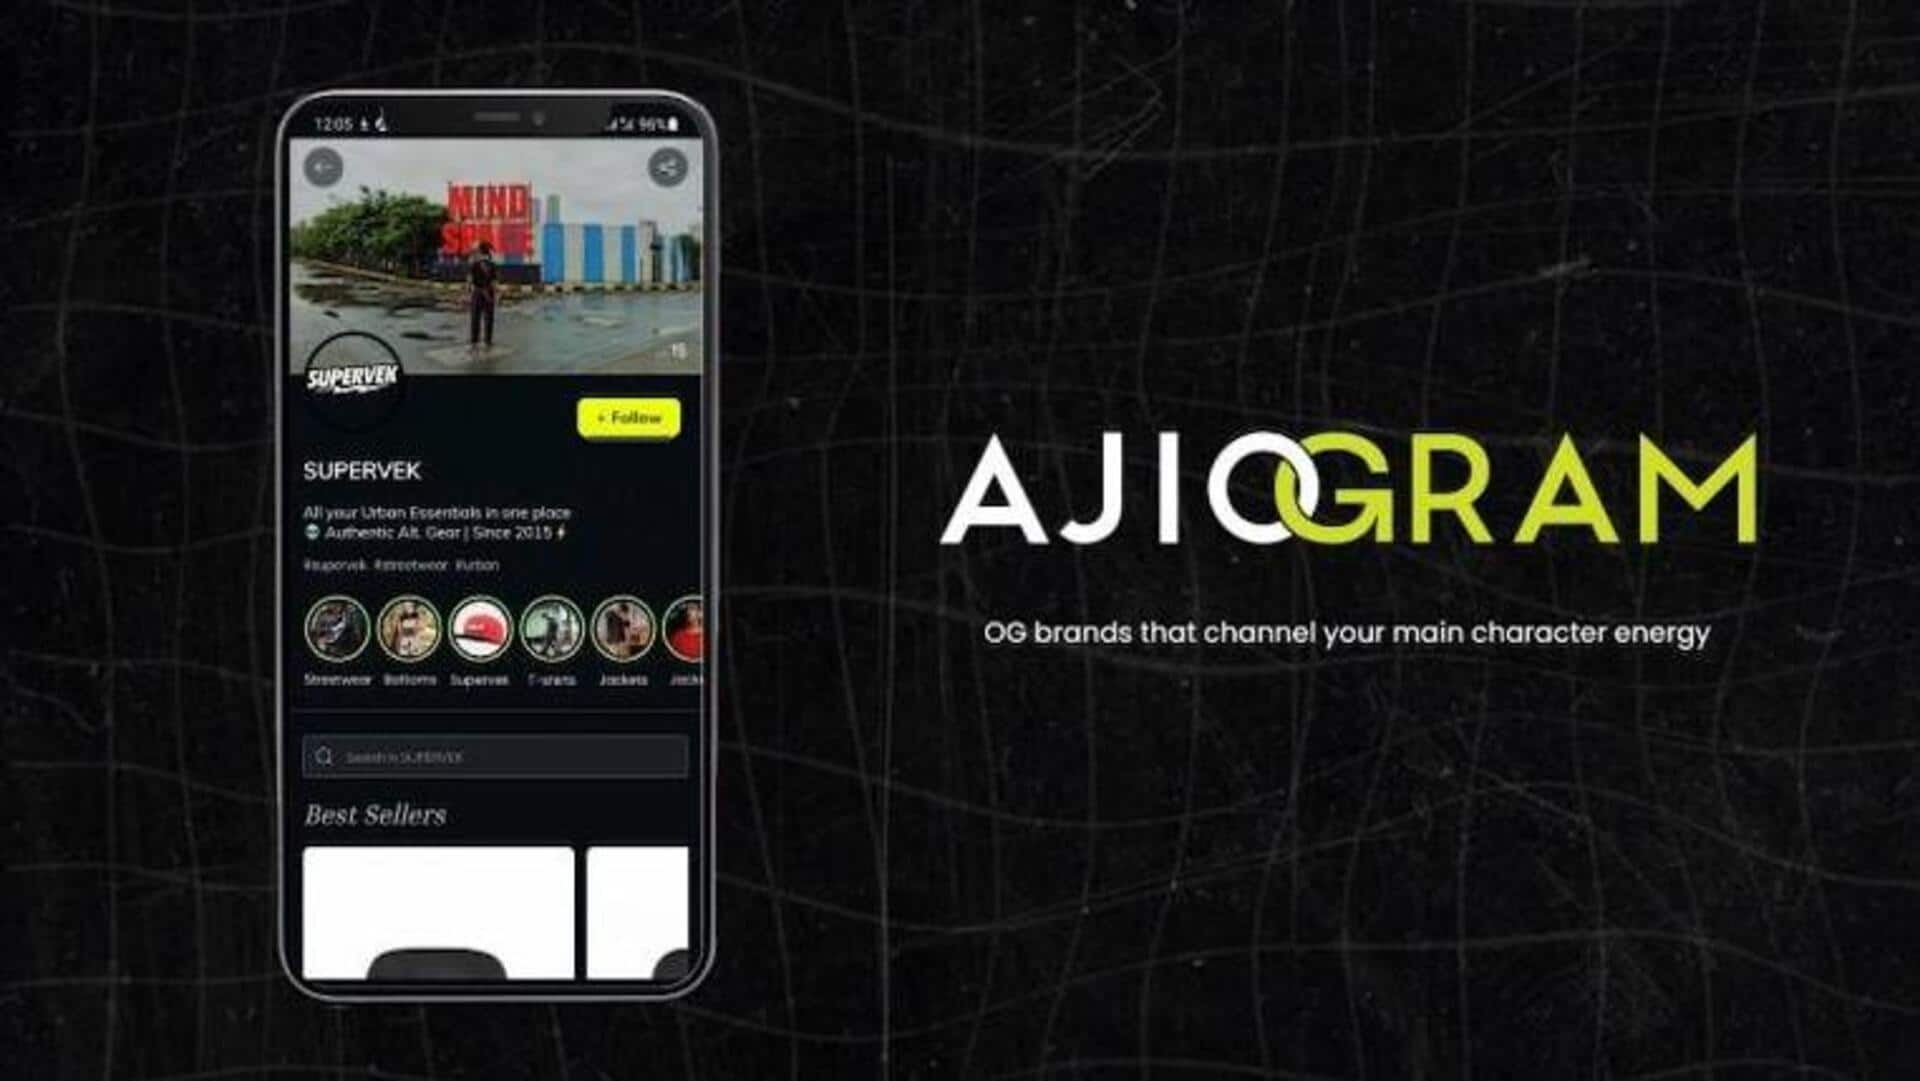 RIL-owned AJIO launches a D2C e-commerce platform called AJIOGRAM